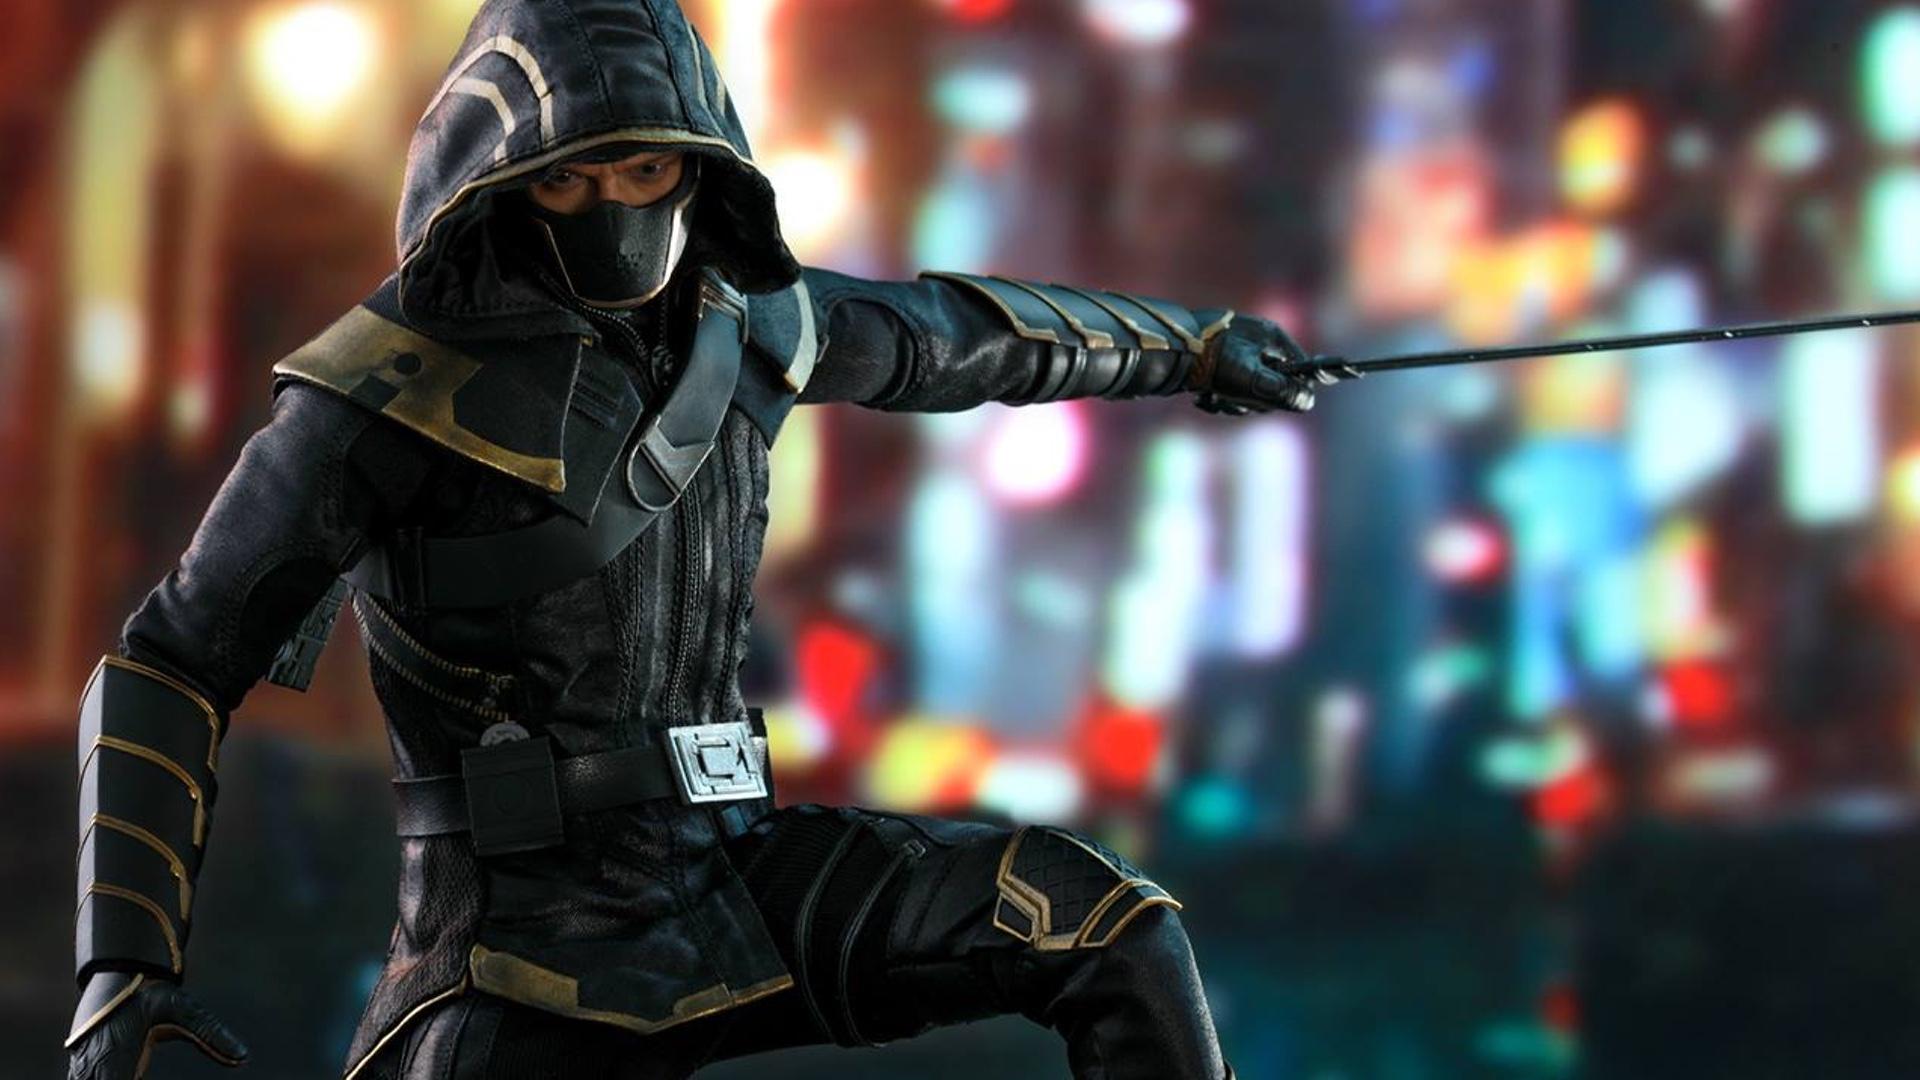 Hot Toys Reveals Their Awesome Hawkeye Ronin Action Figure